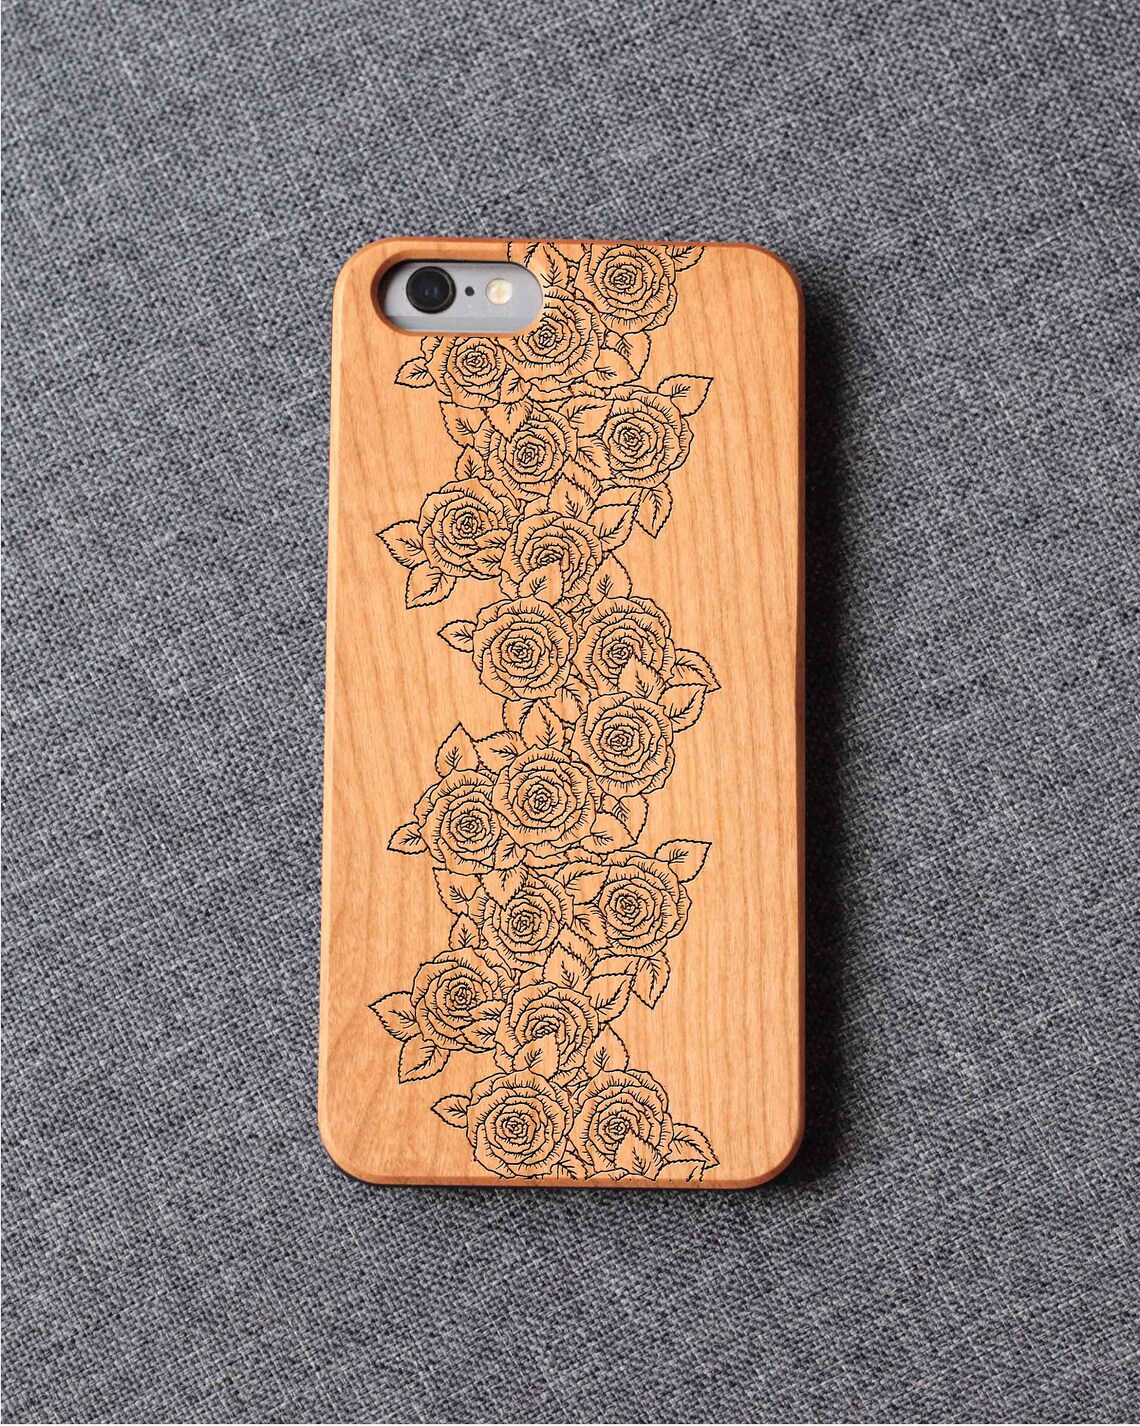 Garden Roses Iphone Case For 13 Mini 11 X Wood Iphone Case Iphone 12 Wood Case Iphone 13 Pro Max, Iphone 12 Case